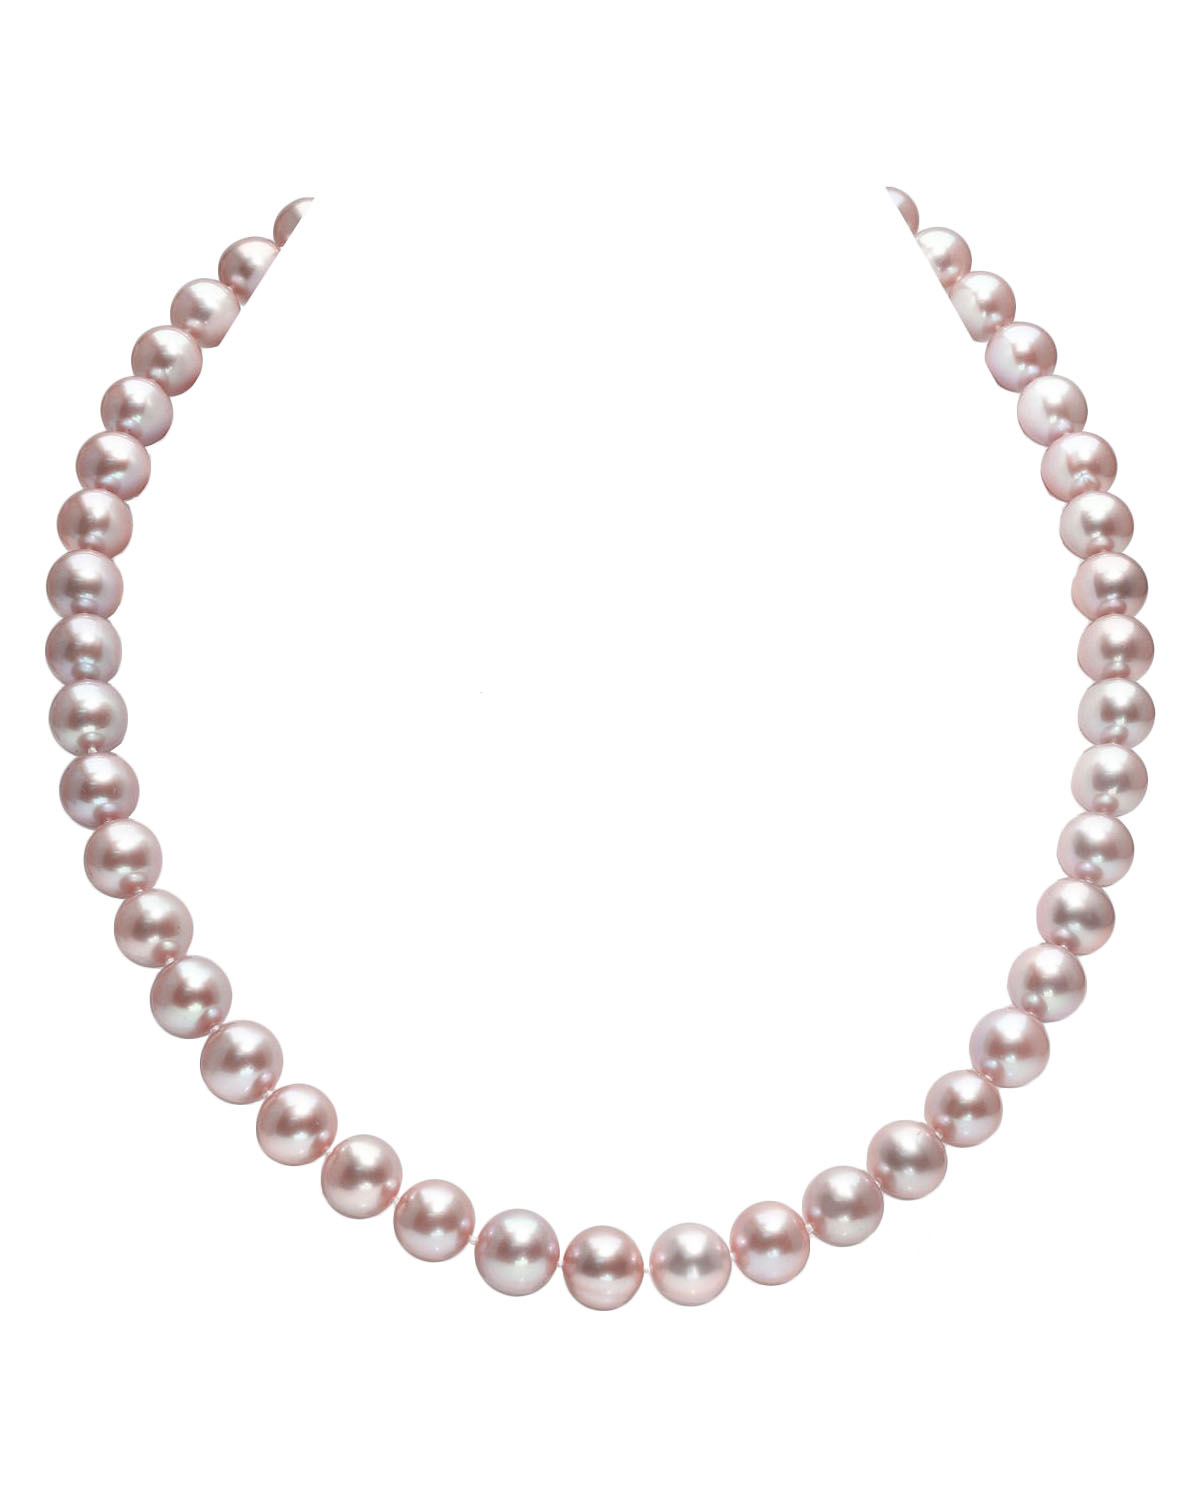 P774 LONG 50" 9MM PINK ROUND FW CULTURED PEARL NECKLACE 